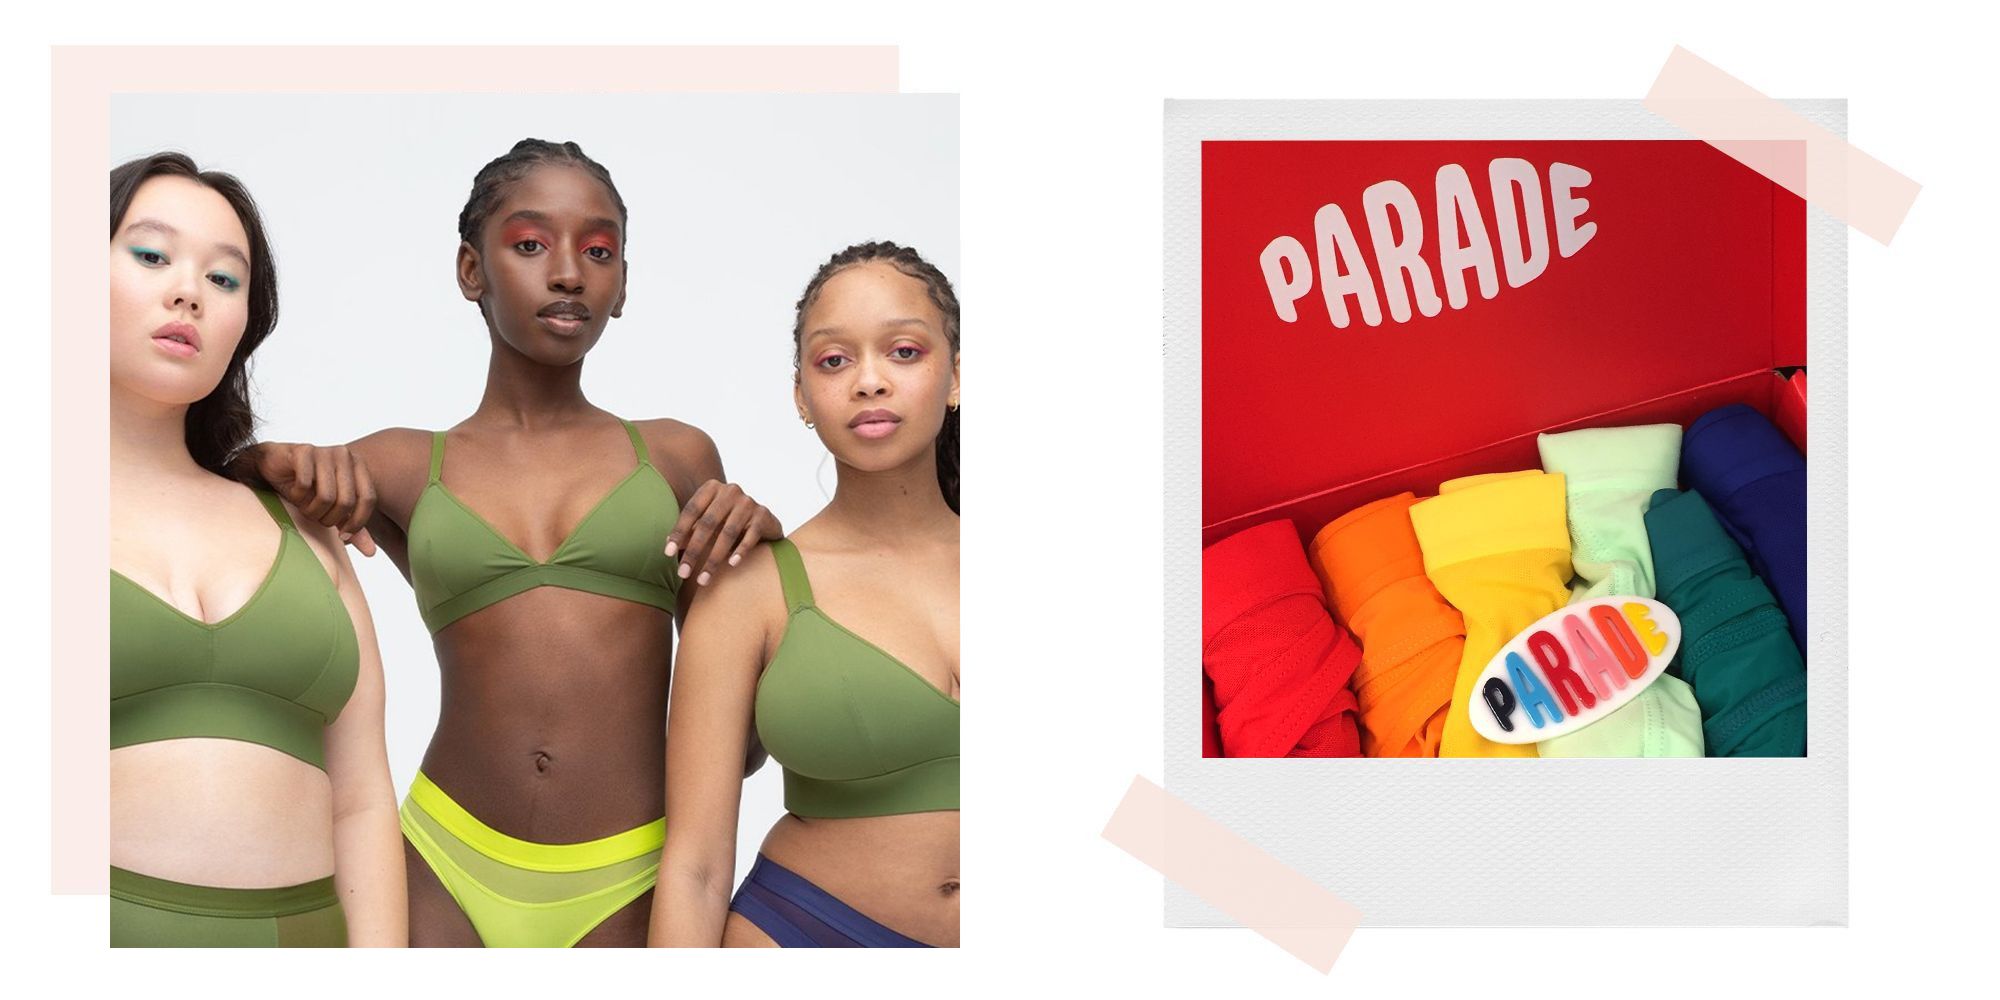 Parade Bras are the best! @parade #paradepartner Discount Code